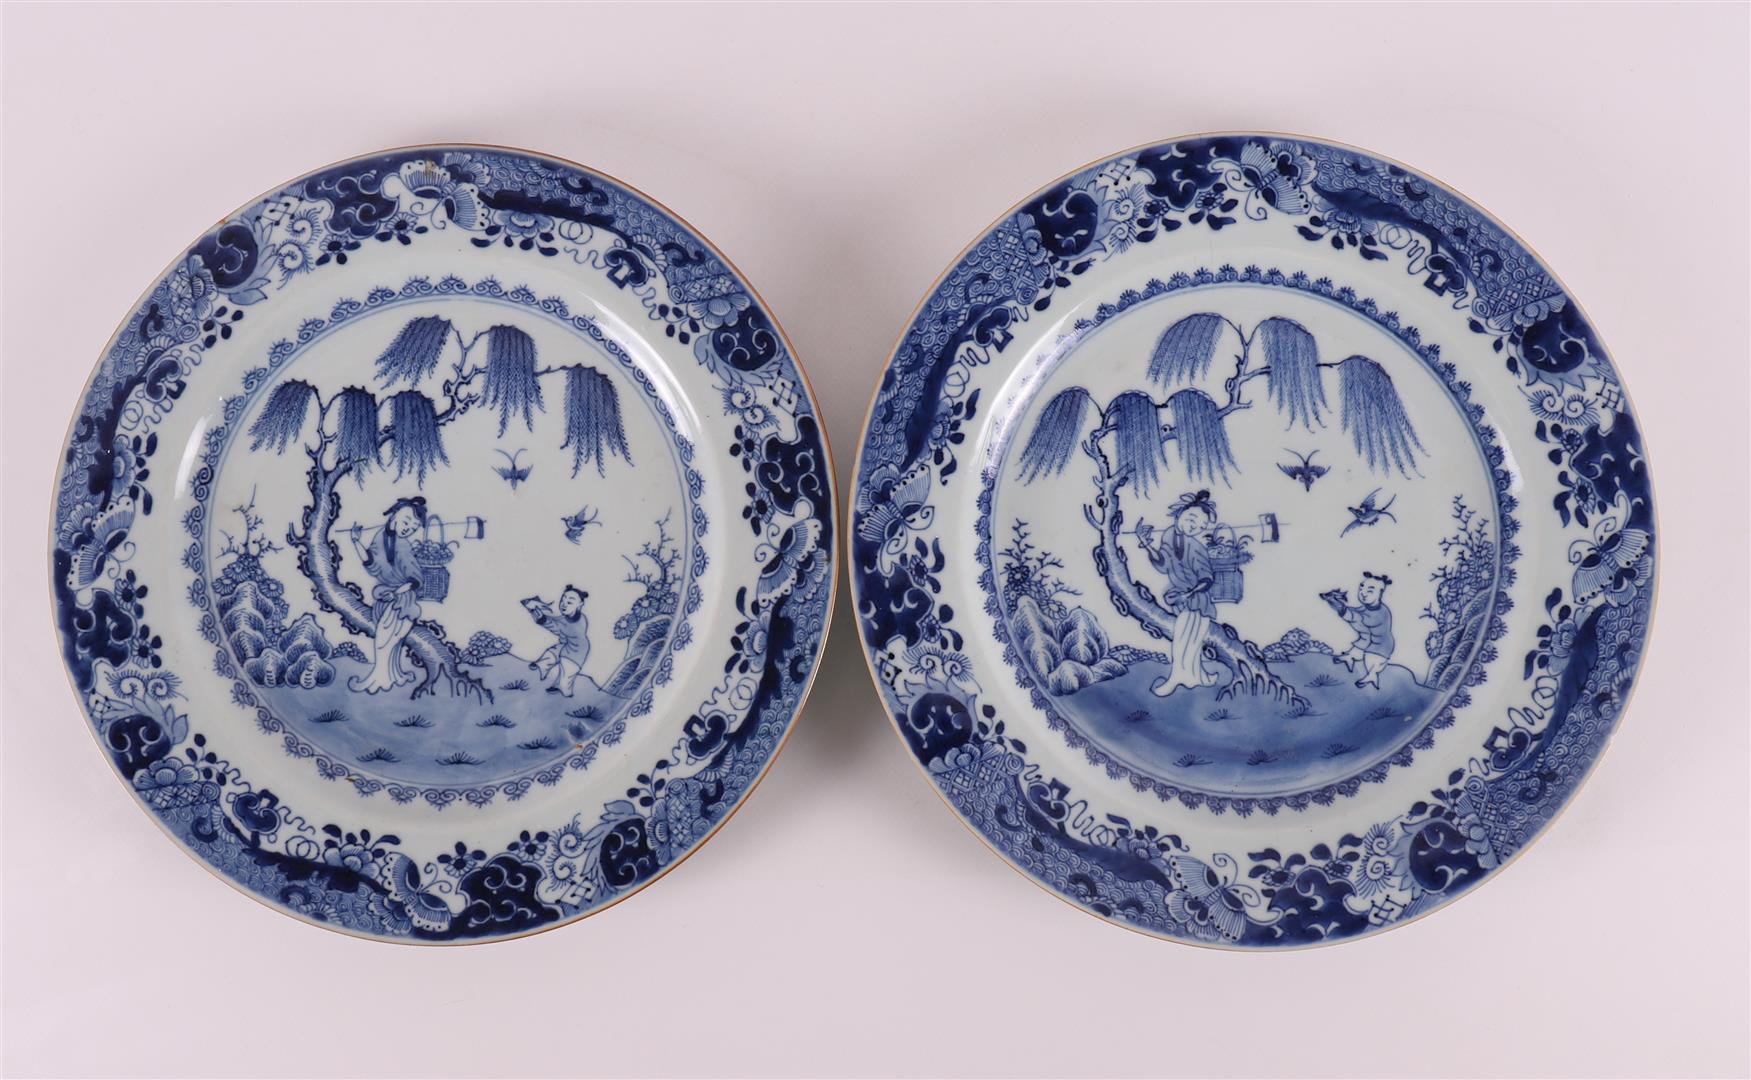 A set of blue and white porcelain dishes, China, Qianlong 18th century.